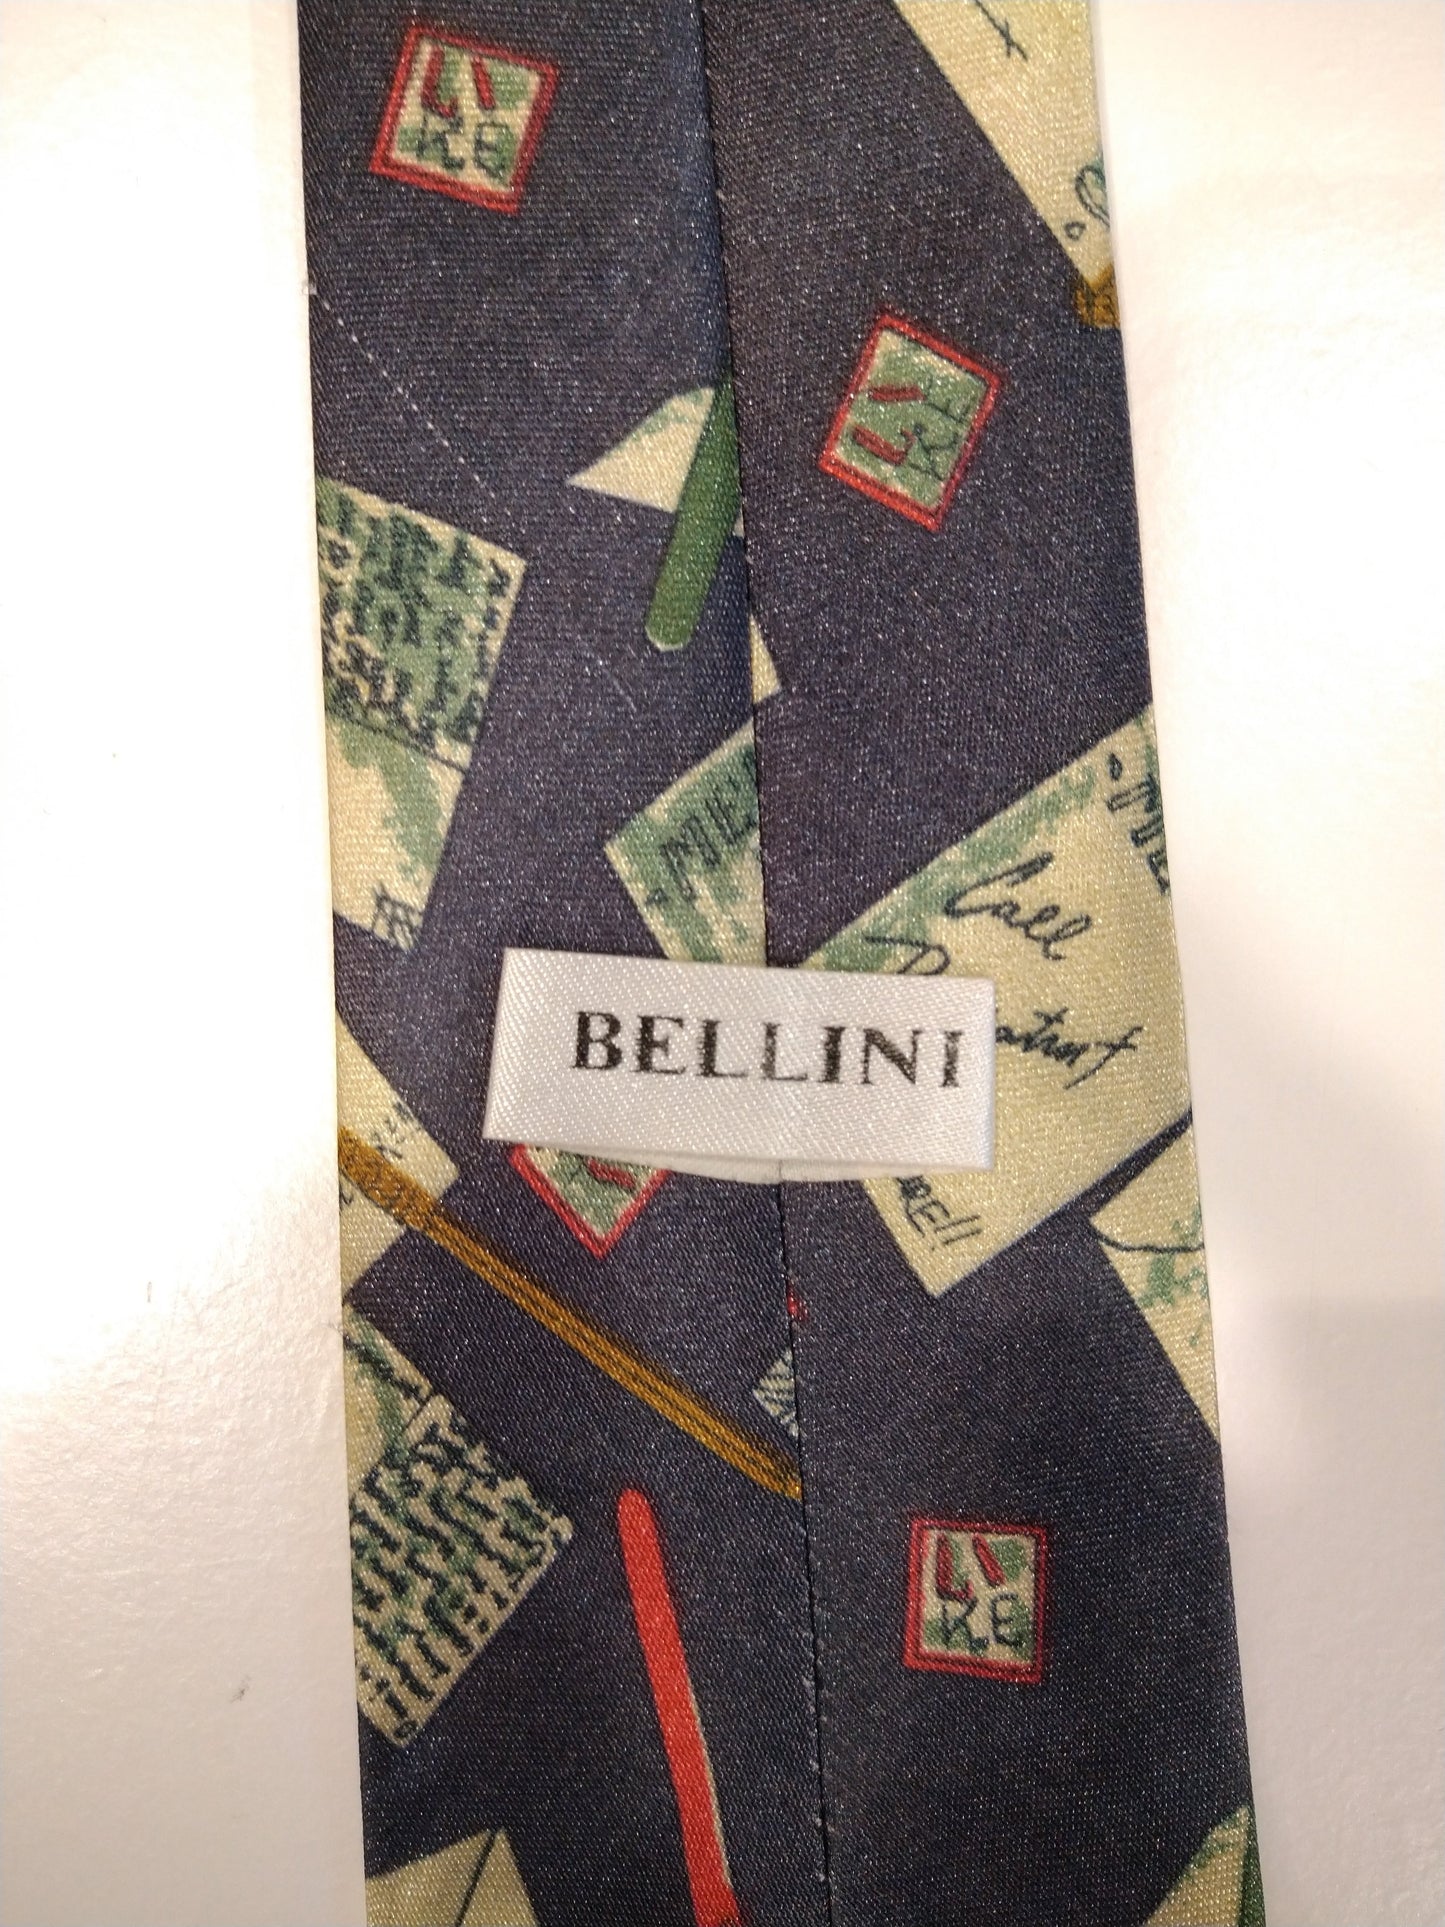 Bellini polyester tie. Colorful motif.